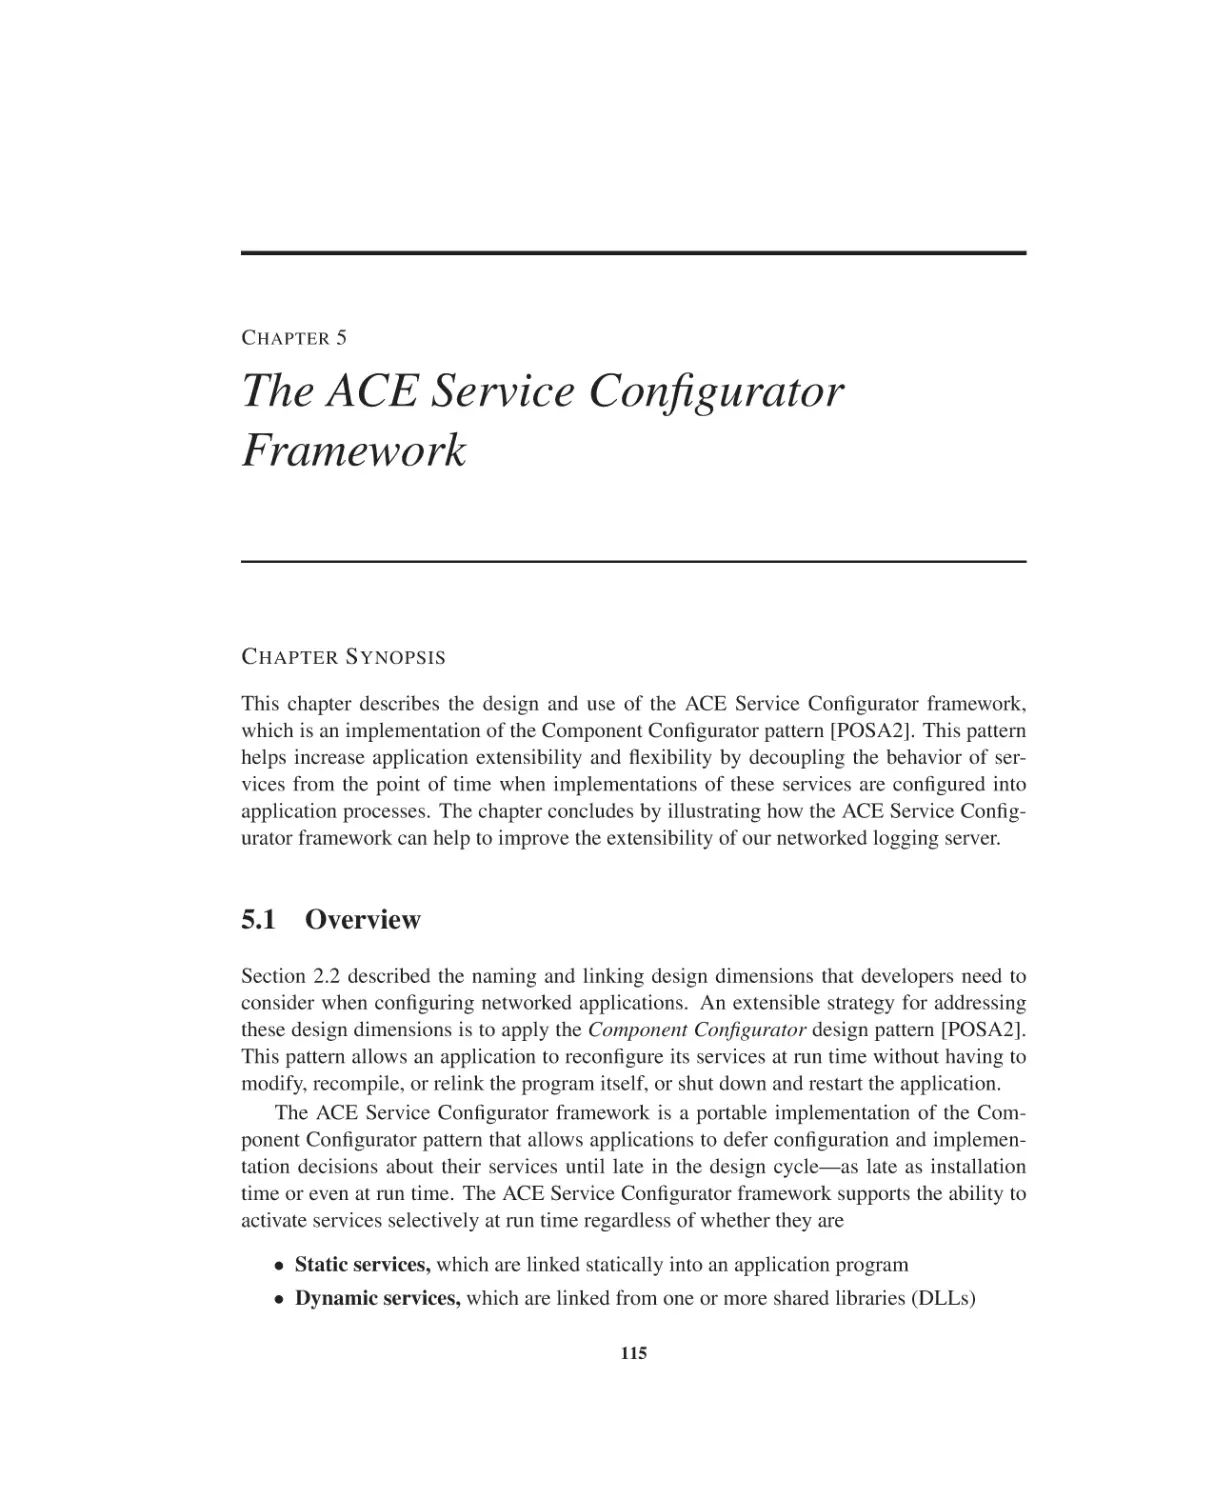 Chapter 5 The ACE Service Configurator Framework
5.1 Overview